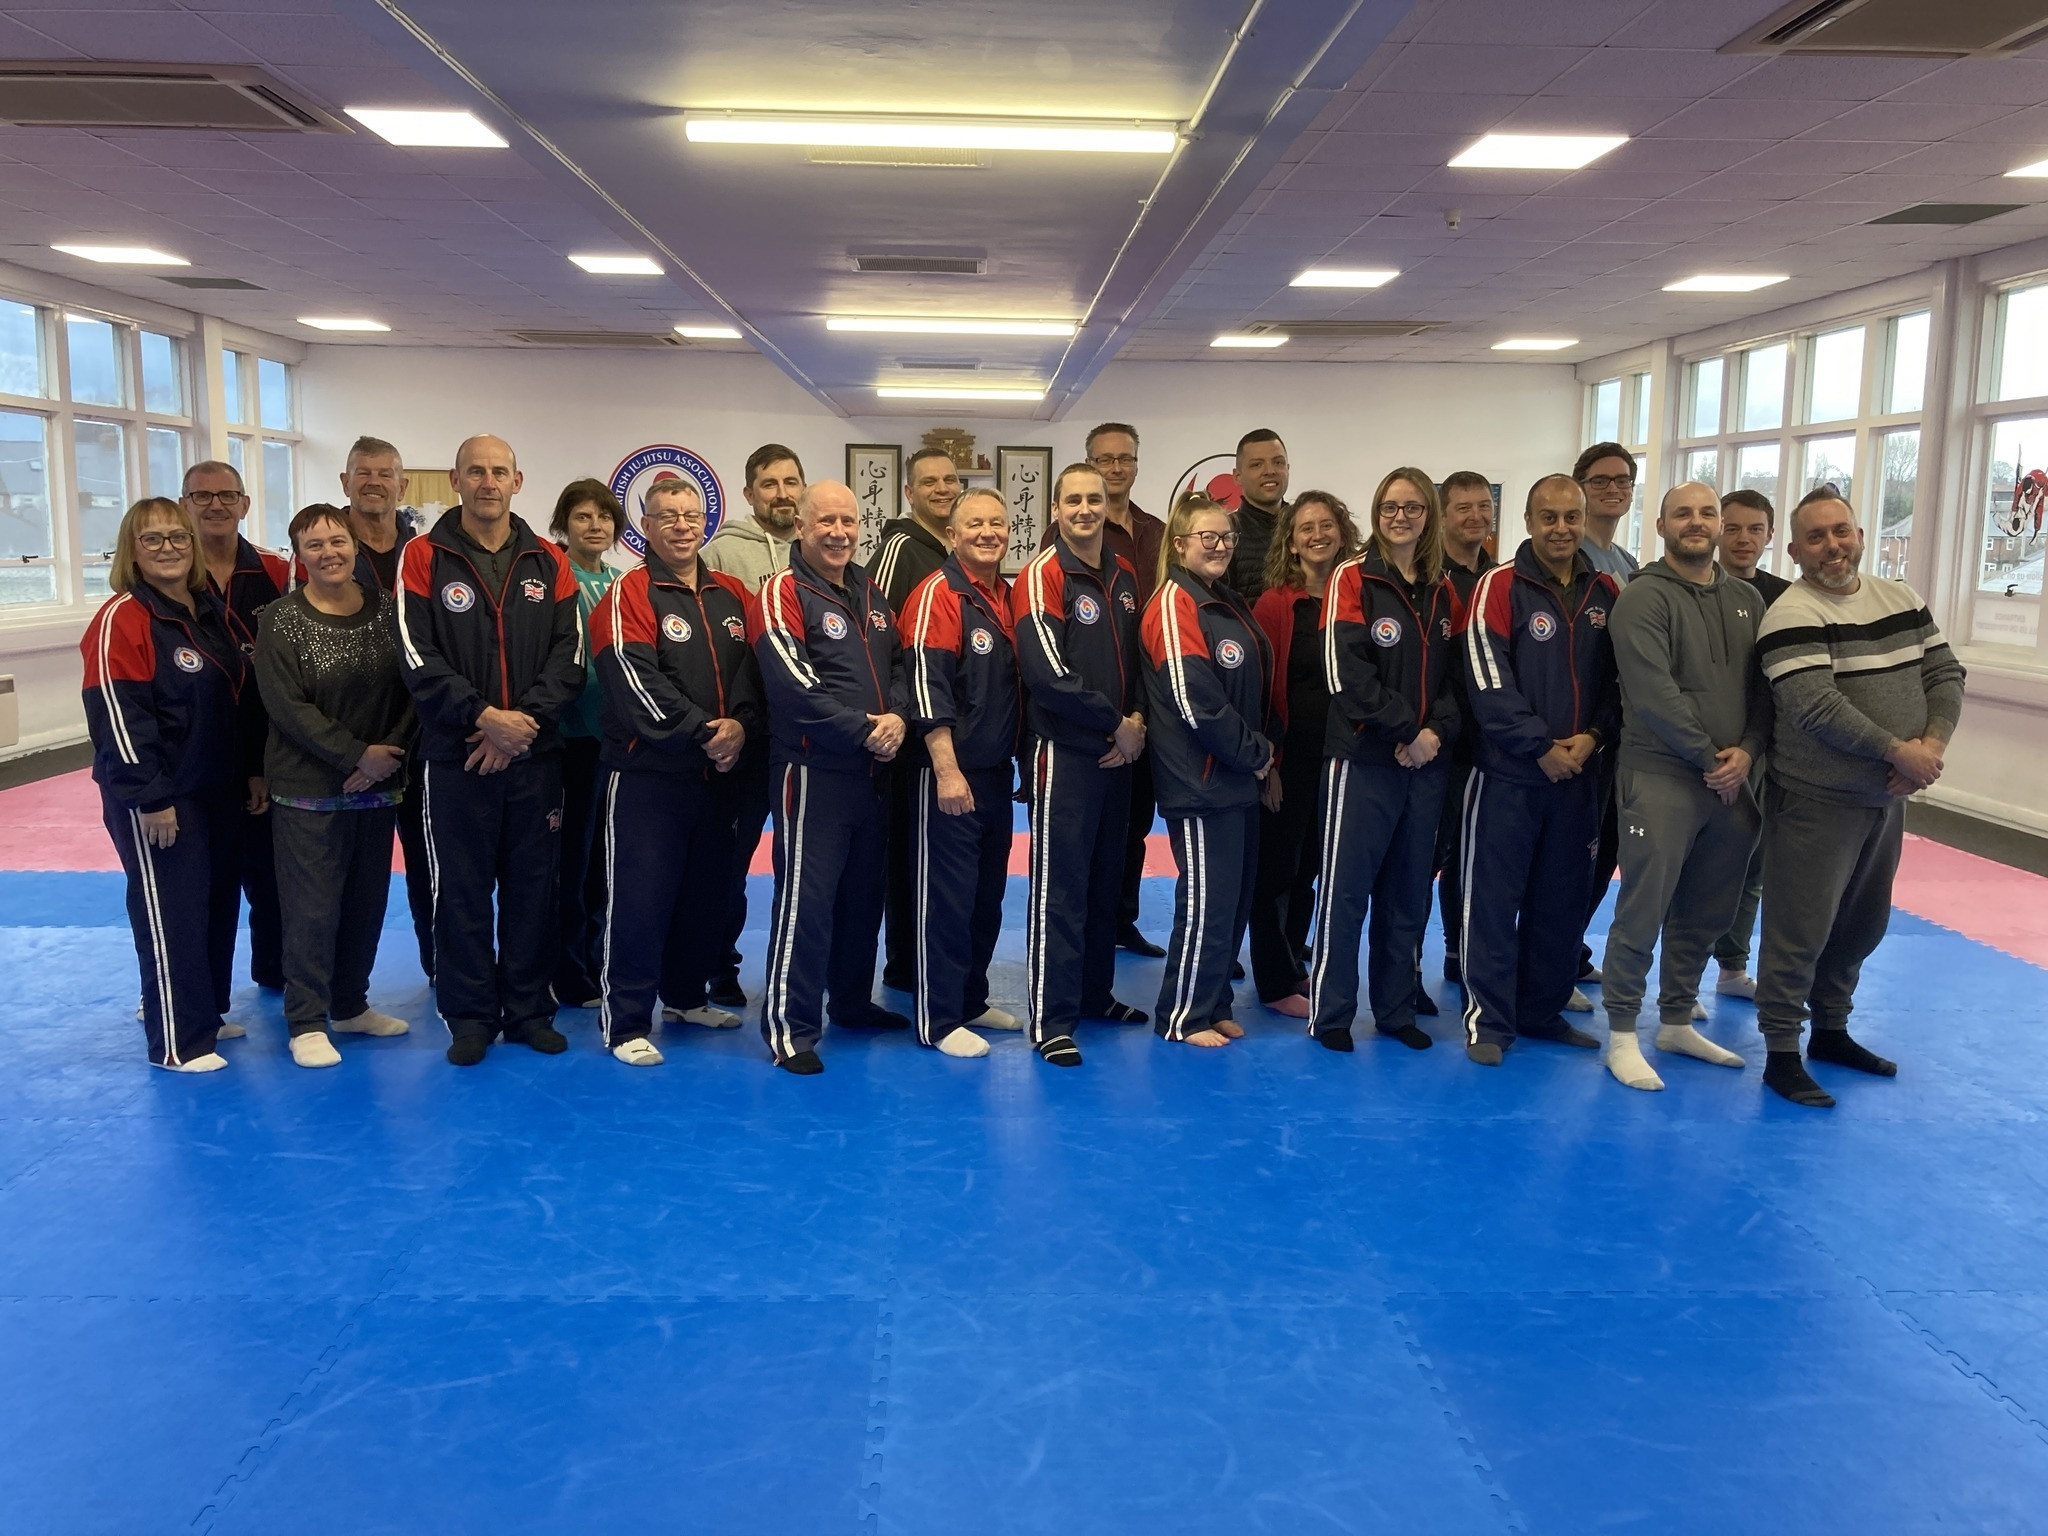 The British Ju-Jitsu Association was found to have failed in several requirements for recognition including governance structure and the organisation's history ©BJJAGB/Facebook